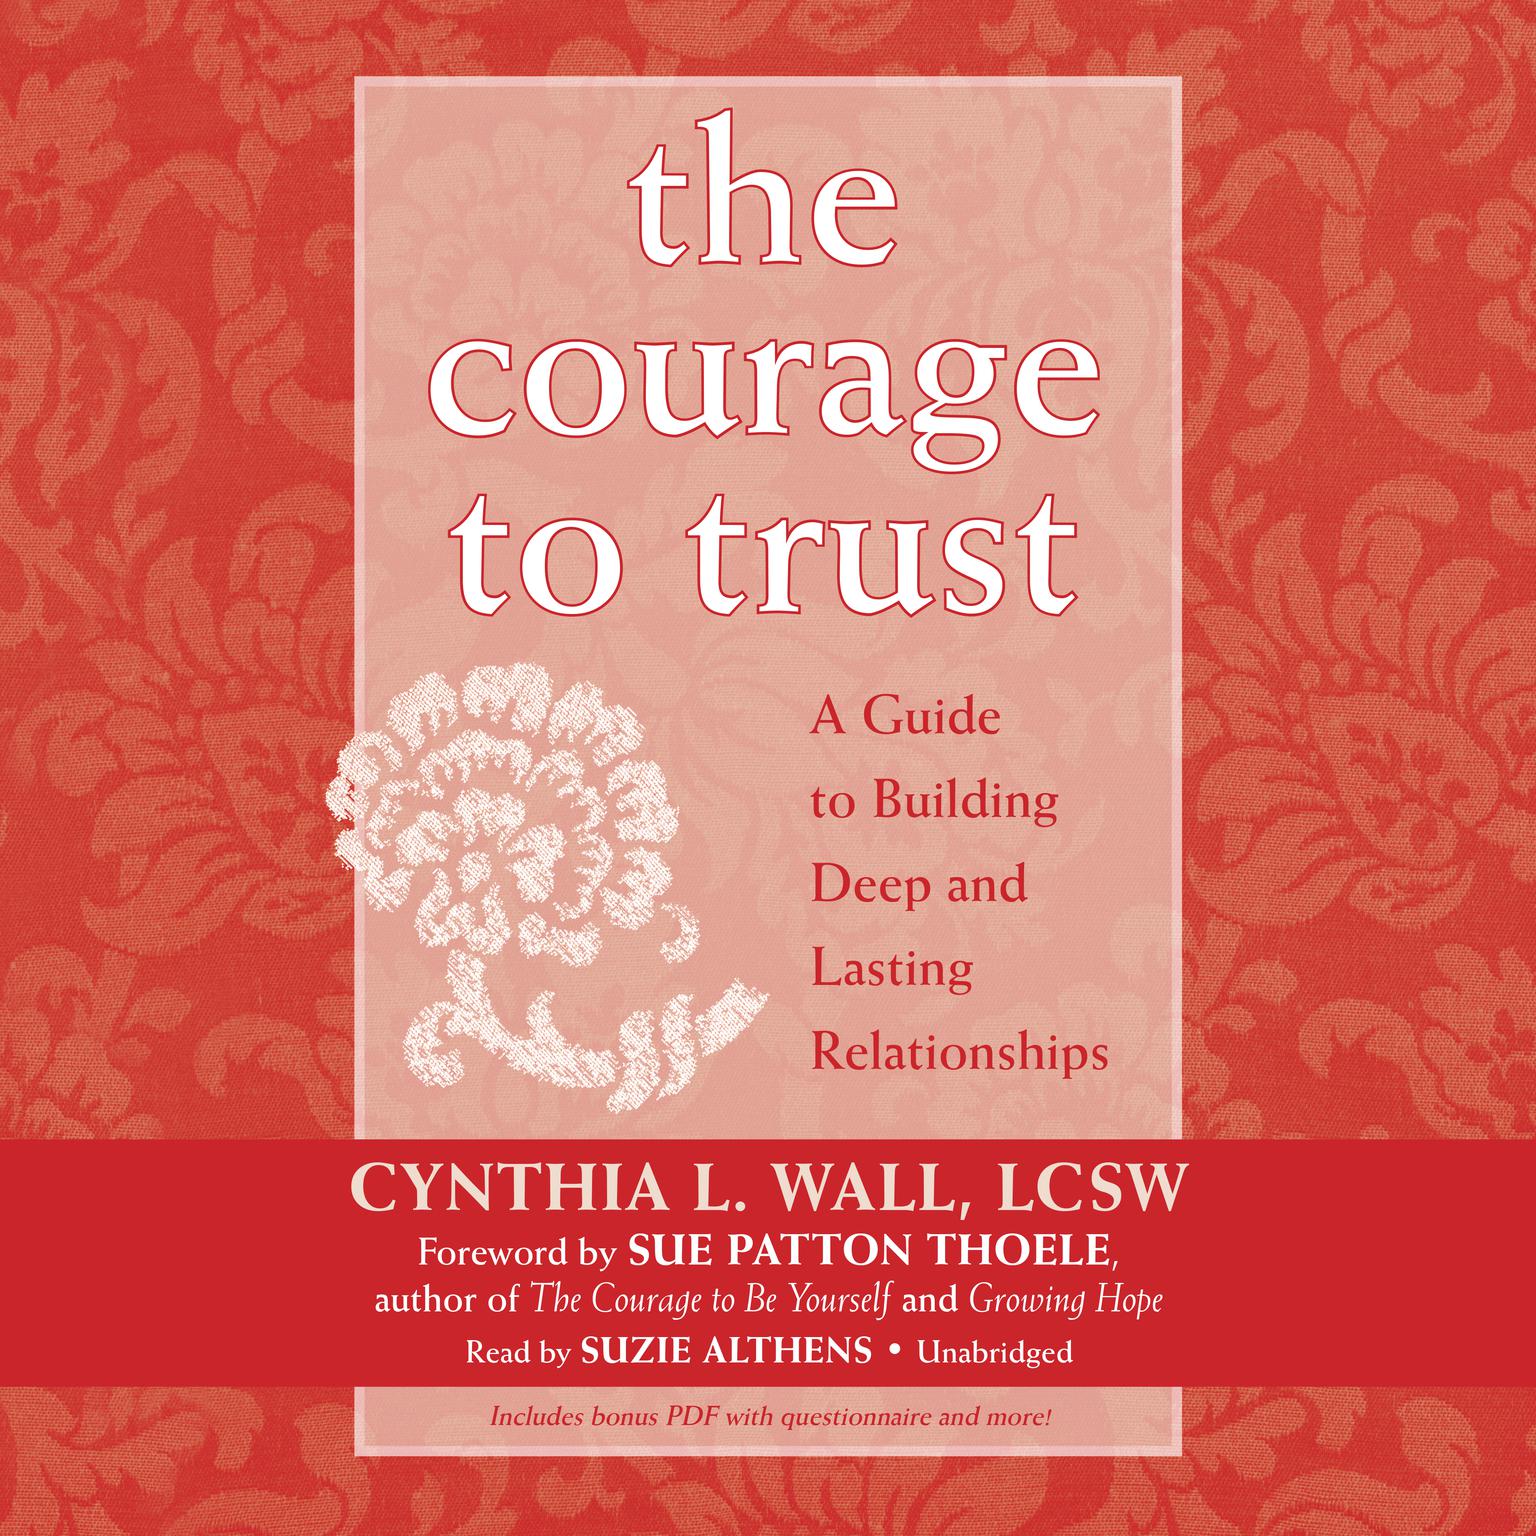 The Courage to Trust: A Guide to Building Deep and Lasting Relationships Audiobook, by Cynthia L. Wall